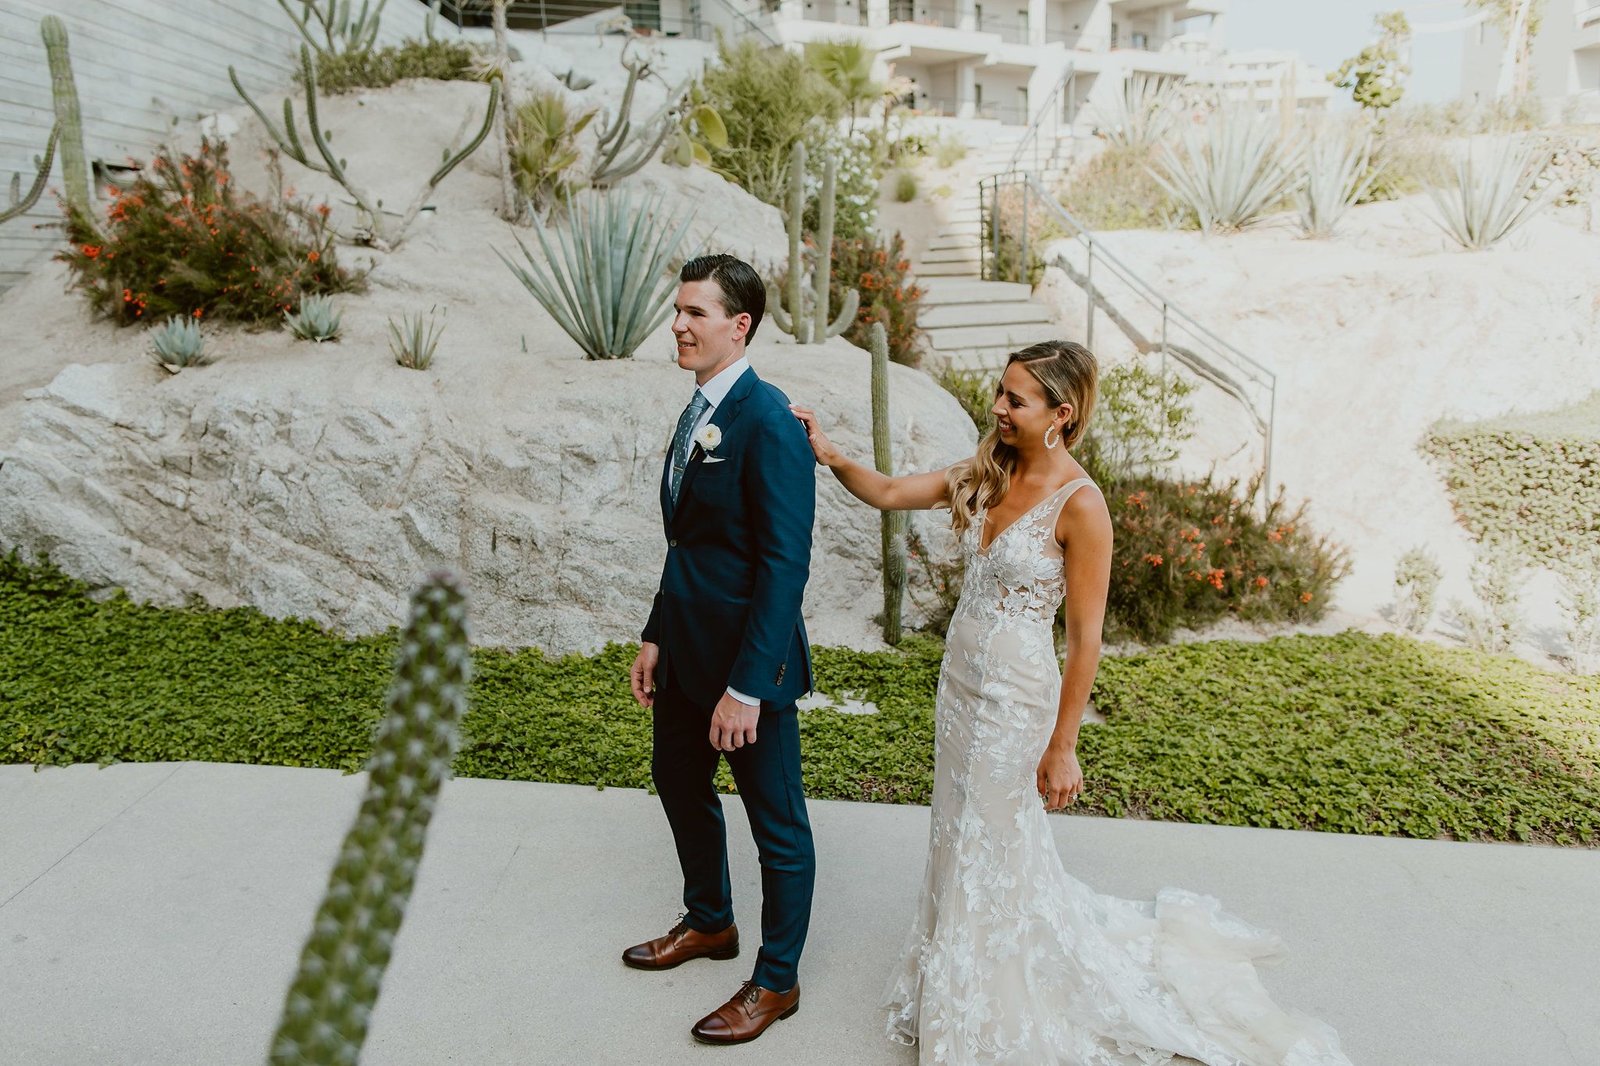 This photo was taken right before the Wedding Ceremony as the Bride and Groom did their first Look. This photo was taken by the Pool at the Cape by Thompson Hotels, planned and designed by Cabo Wedding Services